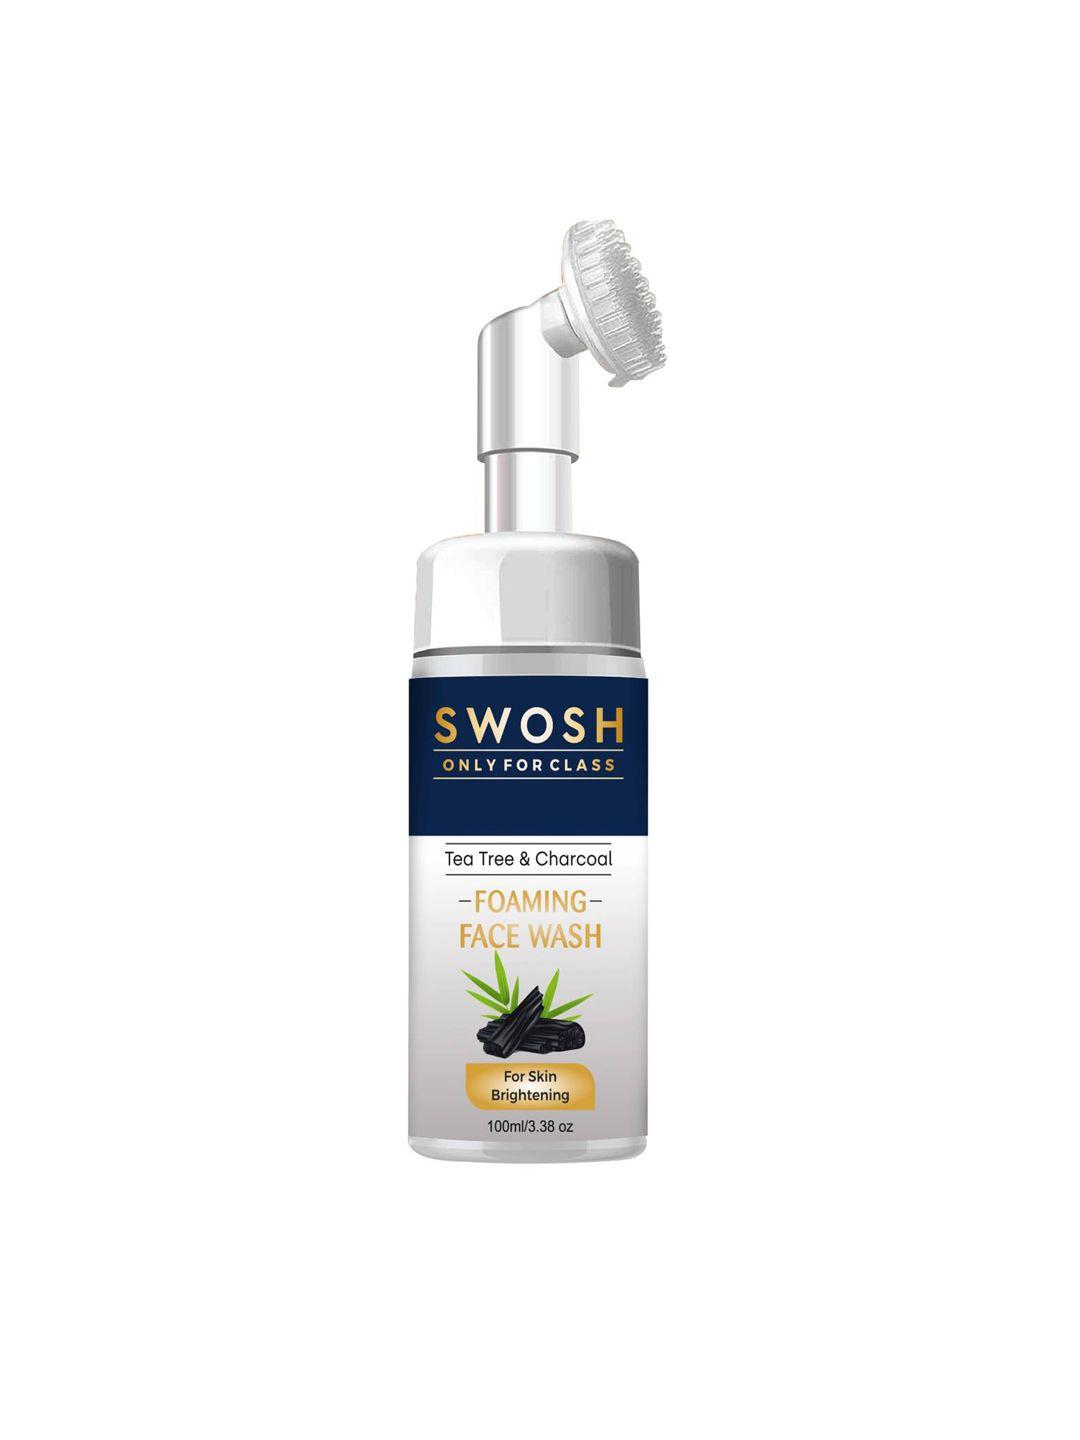 swosh activated charcoal face wash with tea tree oil - 100ml